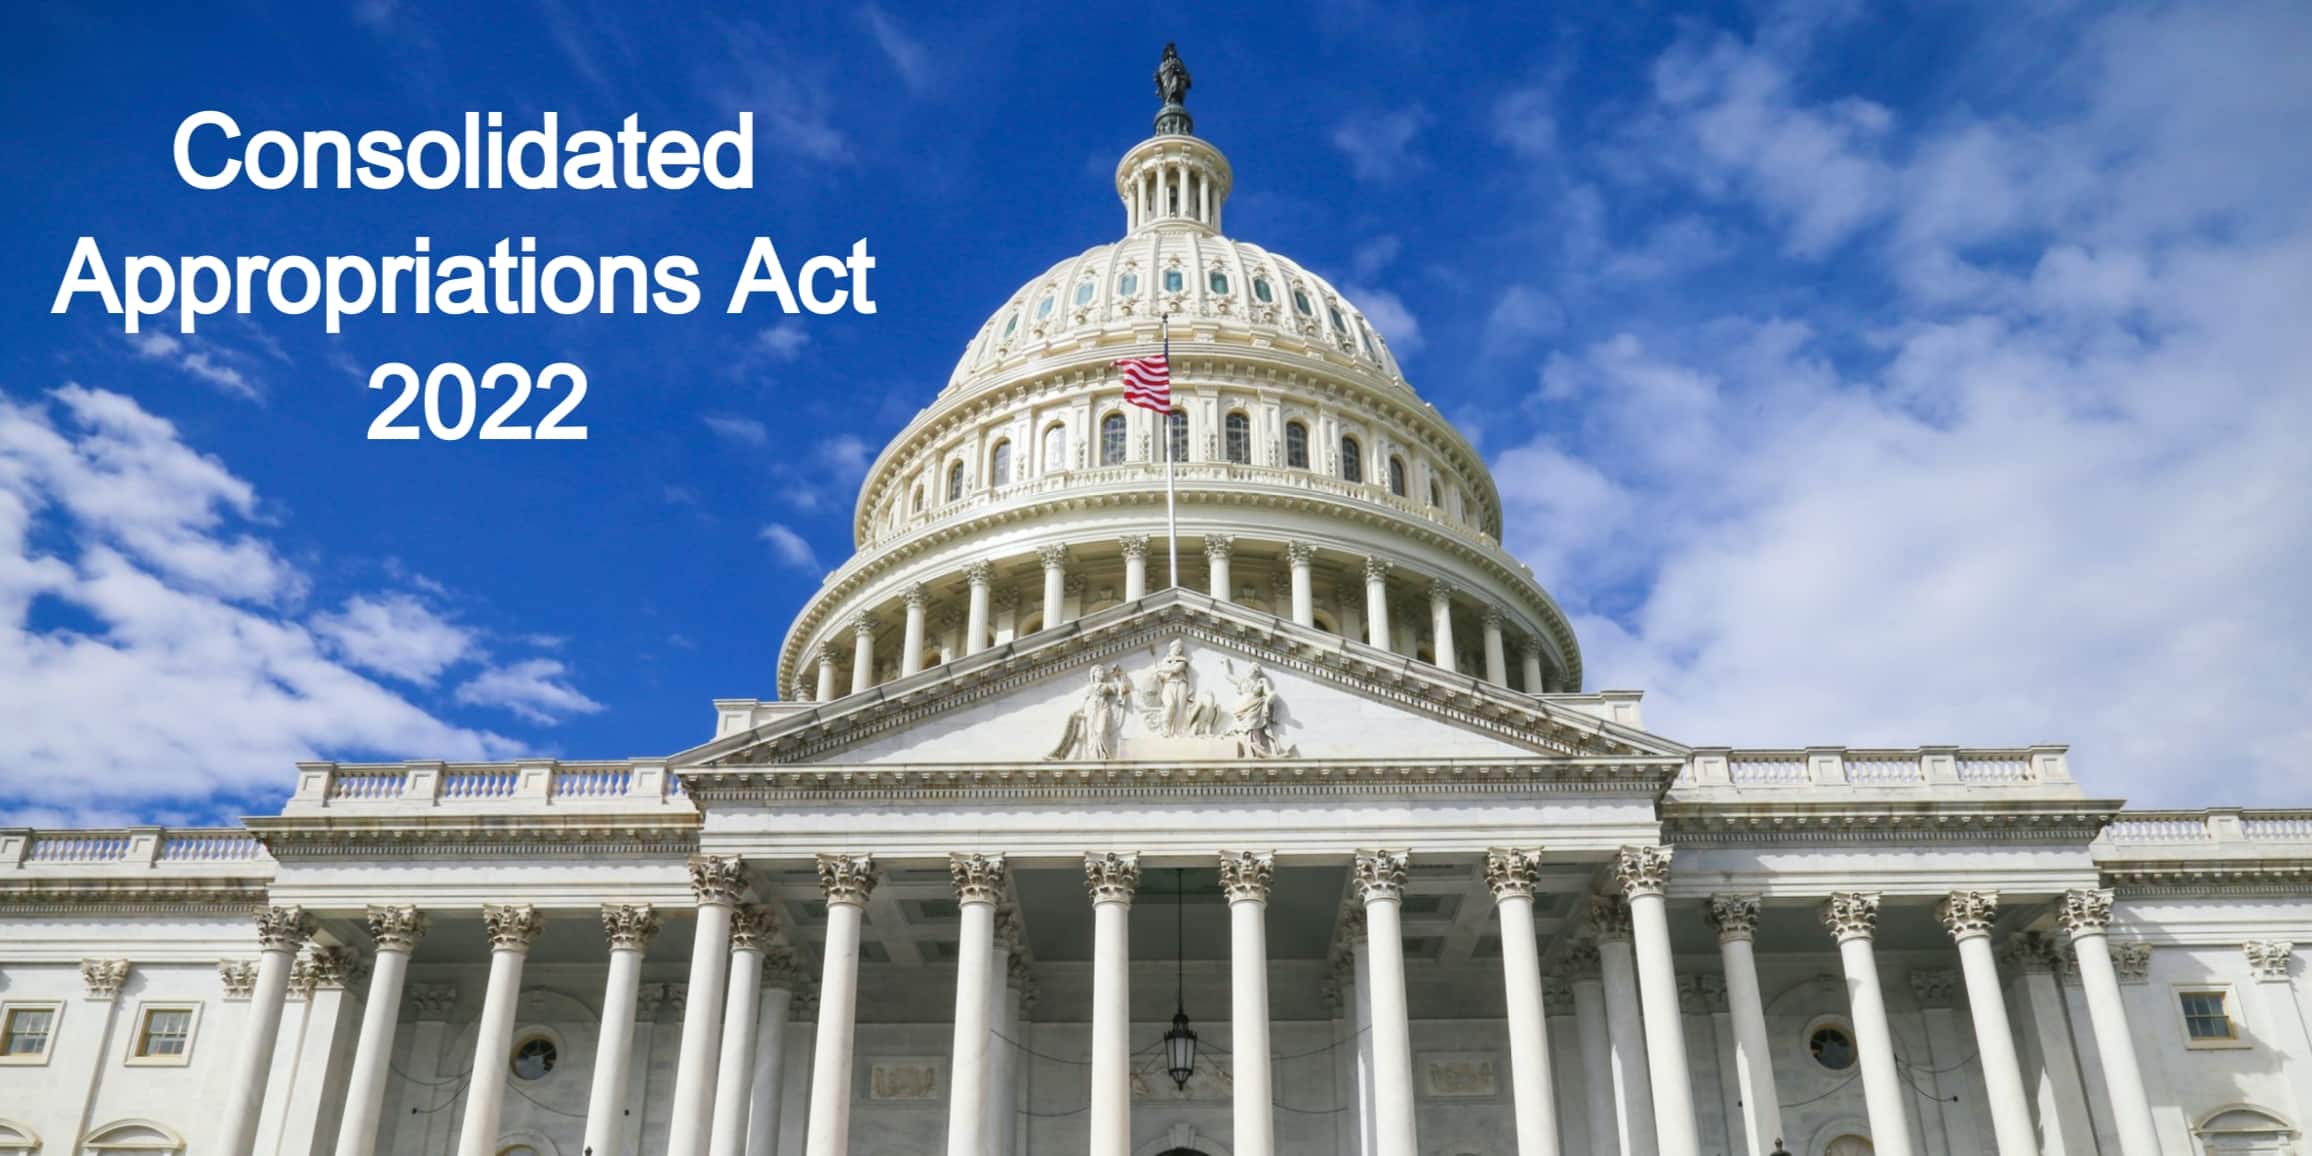 Consolidated Appropriations Act 2022